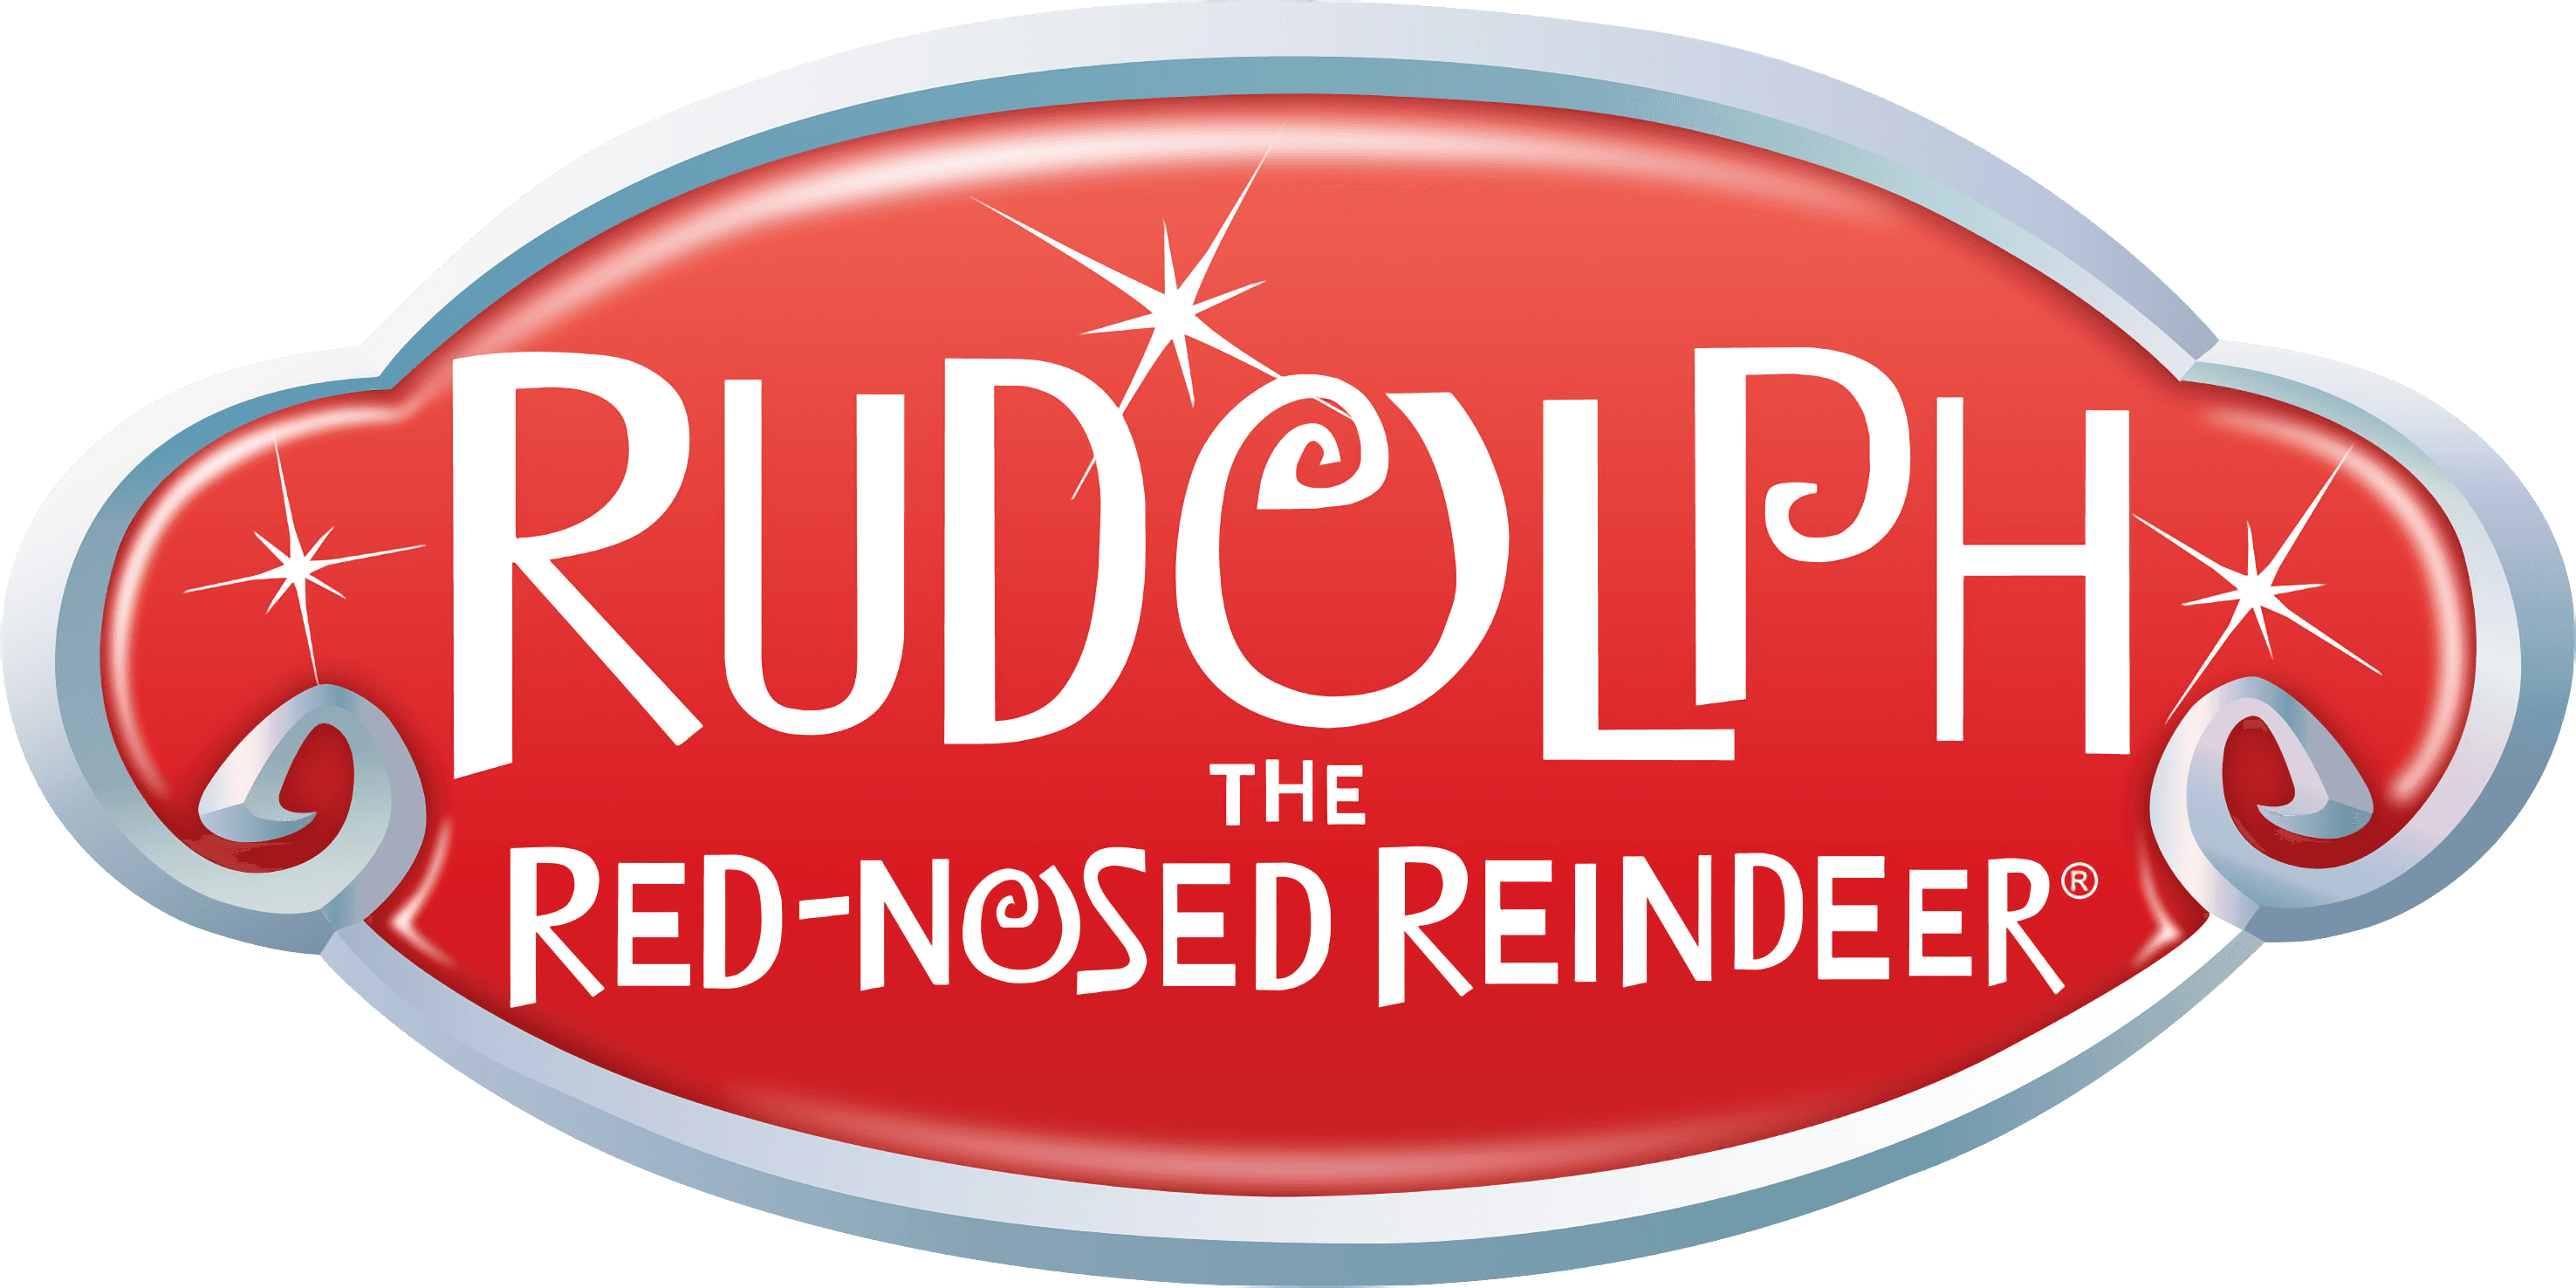 Rudolph the Red-Nosed Reindeer logo